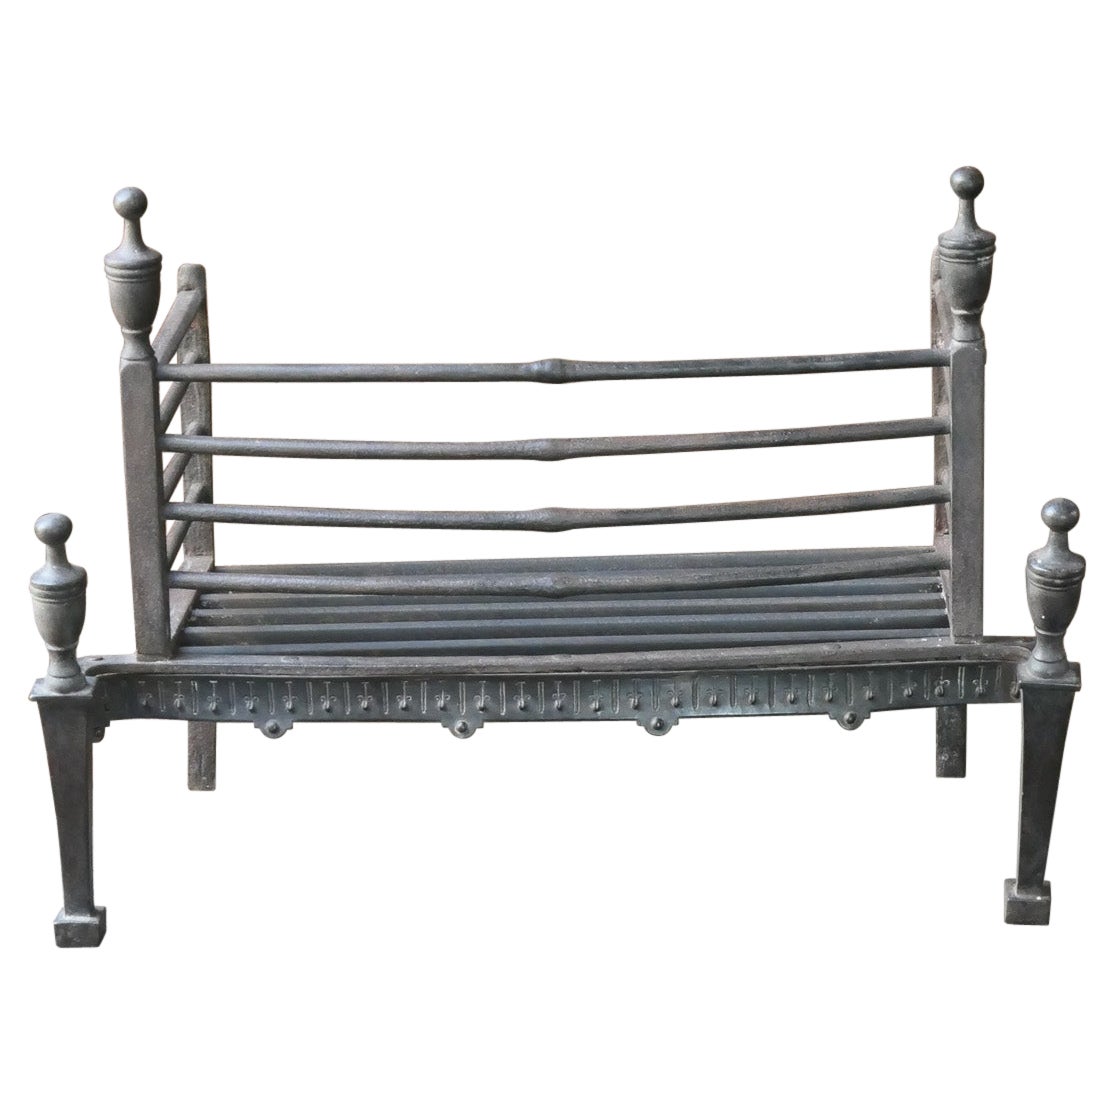 Beautiful 18th-19th Century Dutch Neoclassical Fireplace Grate or Fire Grate For Sale